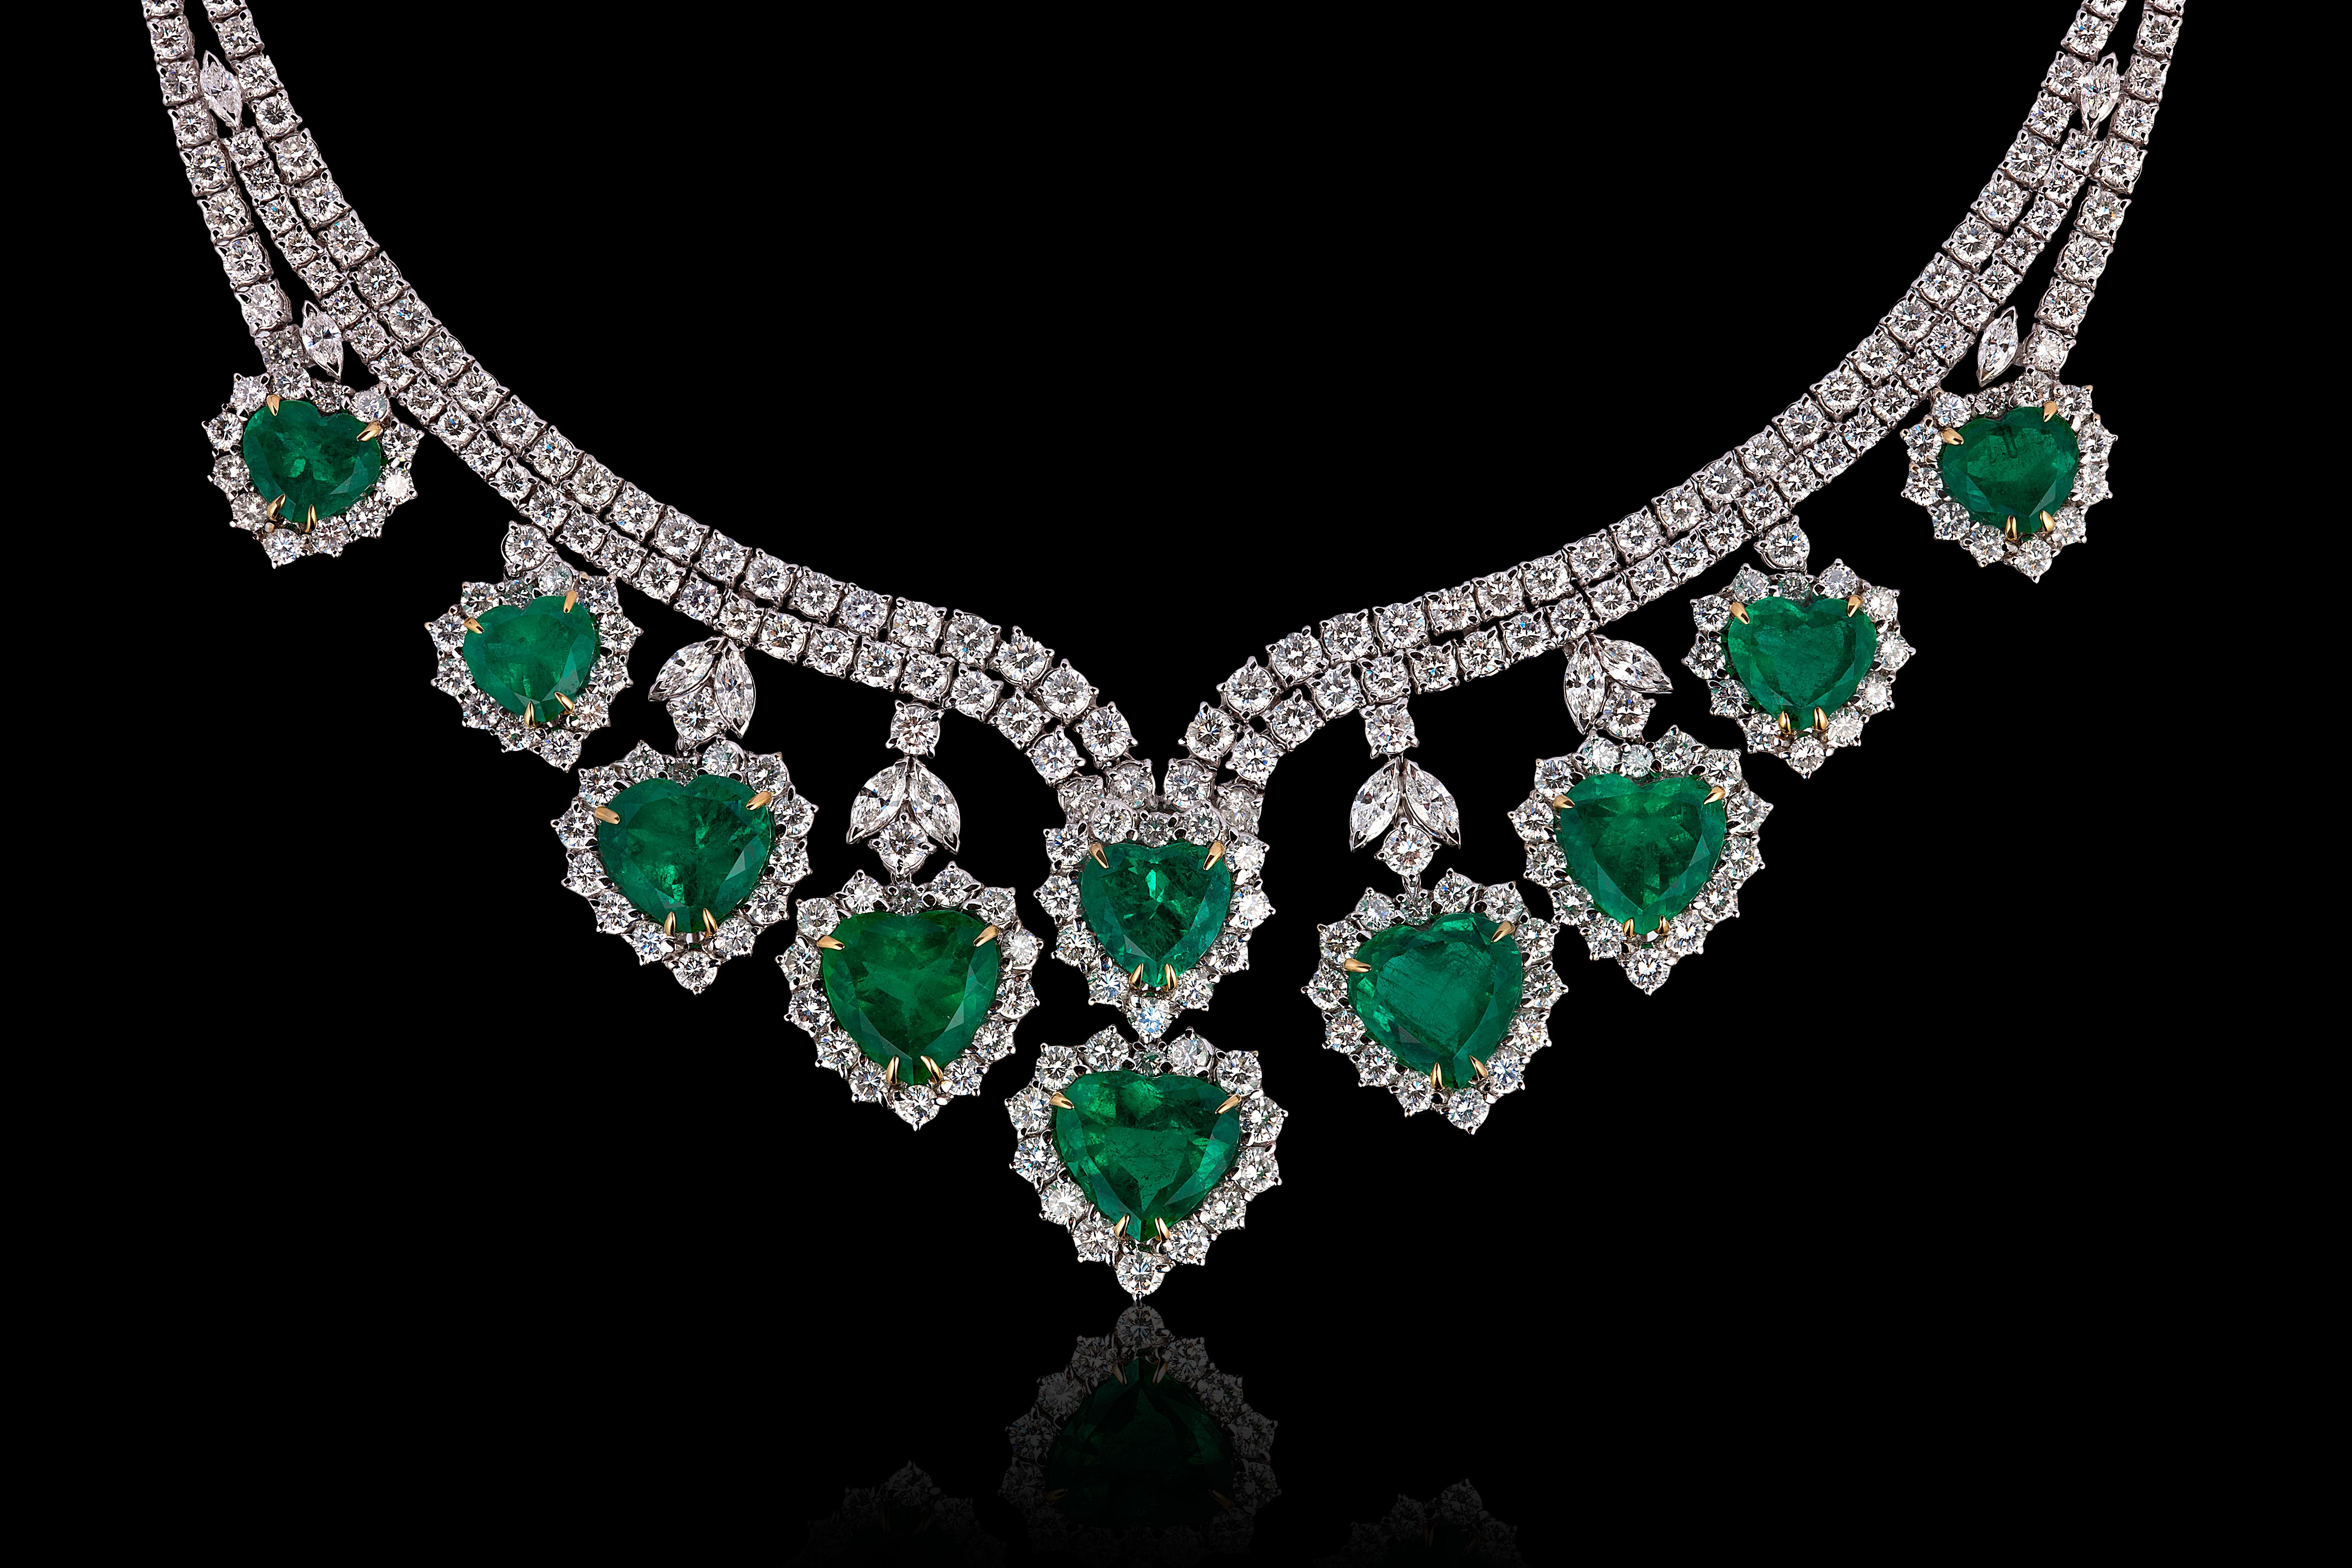 Contemporary Andreoli Heart Shape Colombian Emerald Diamond Necklace CDC Certified 18Kt Gold For Sale